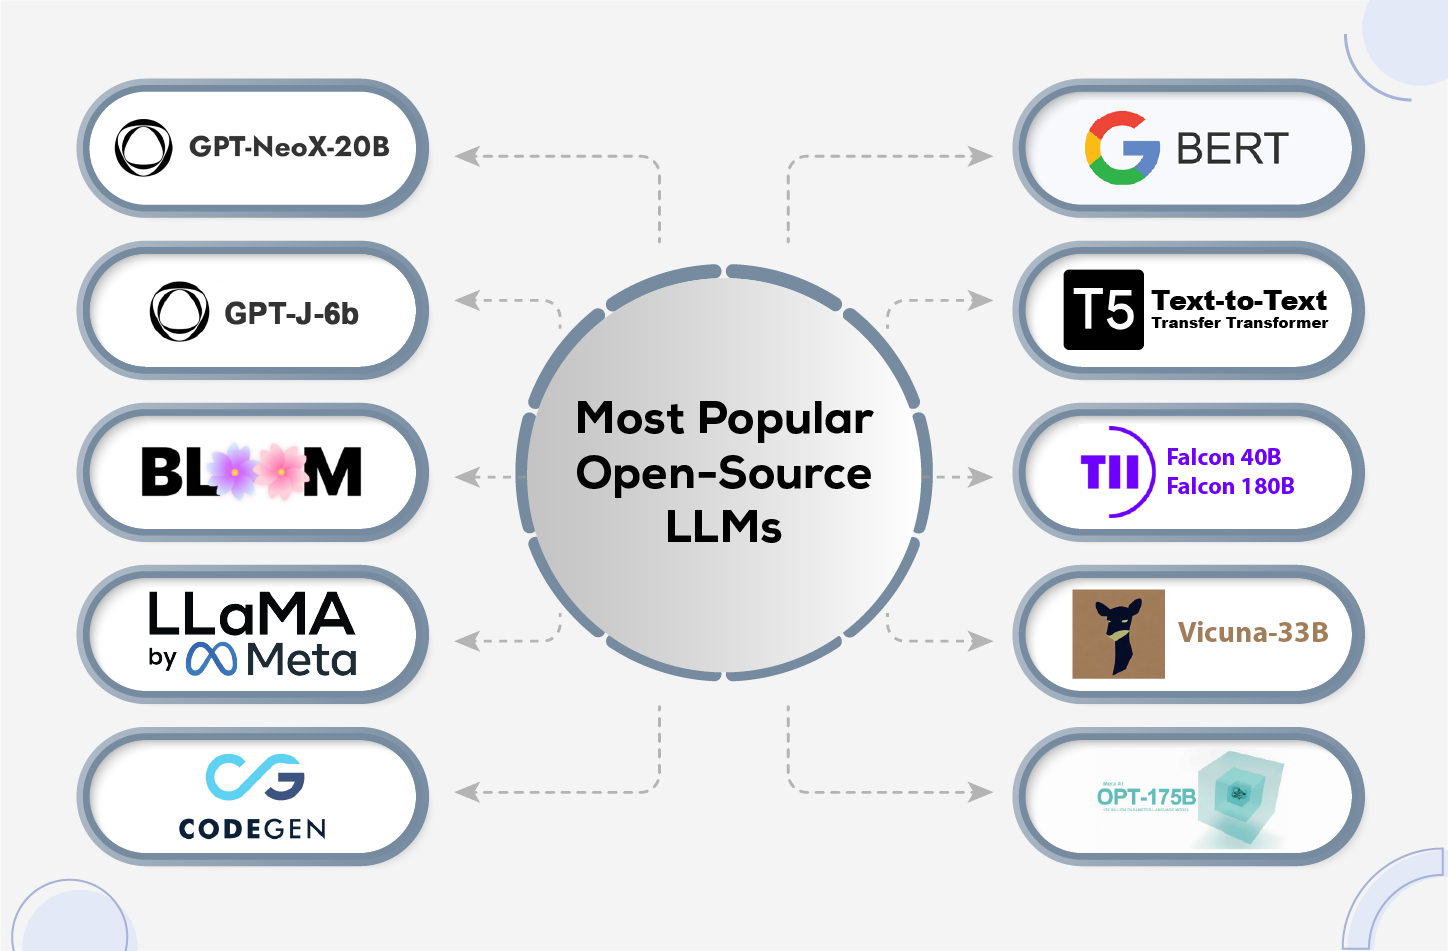 The Most Popular Open-Source LLMs